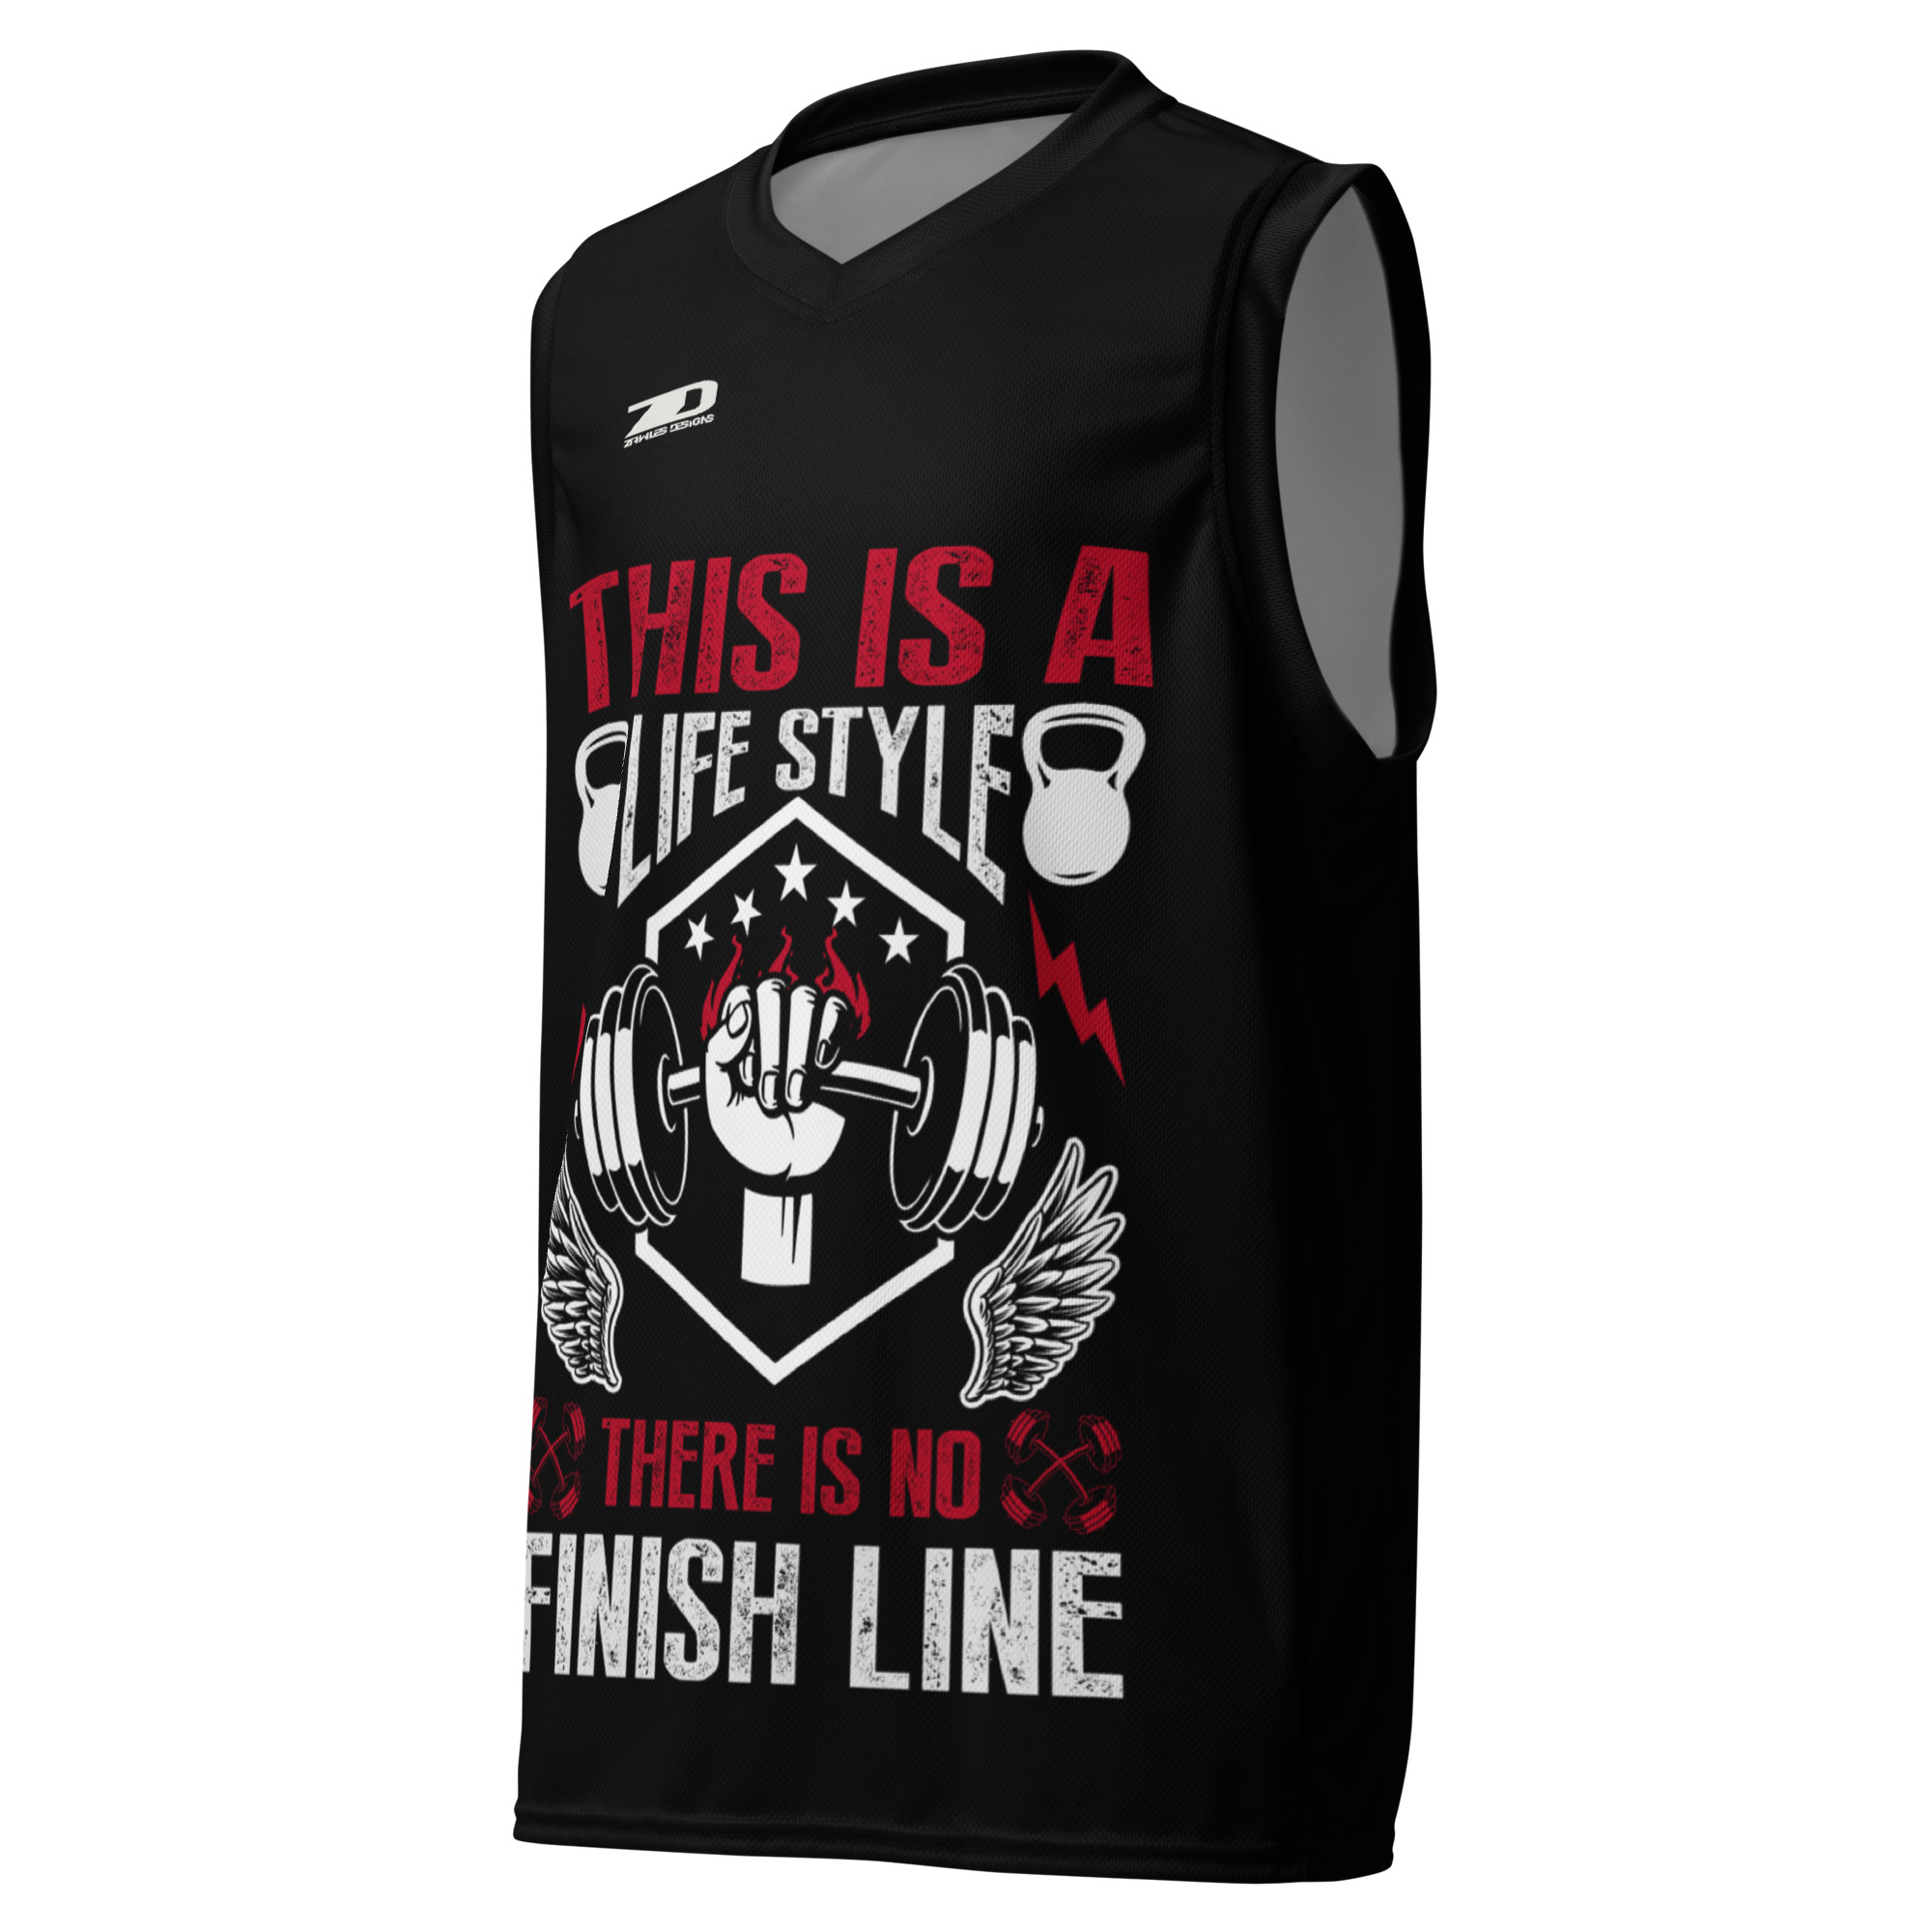 custom design basketball jersey This Is A Lifestyle There is no finish line